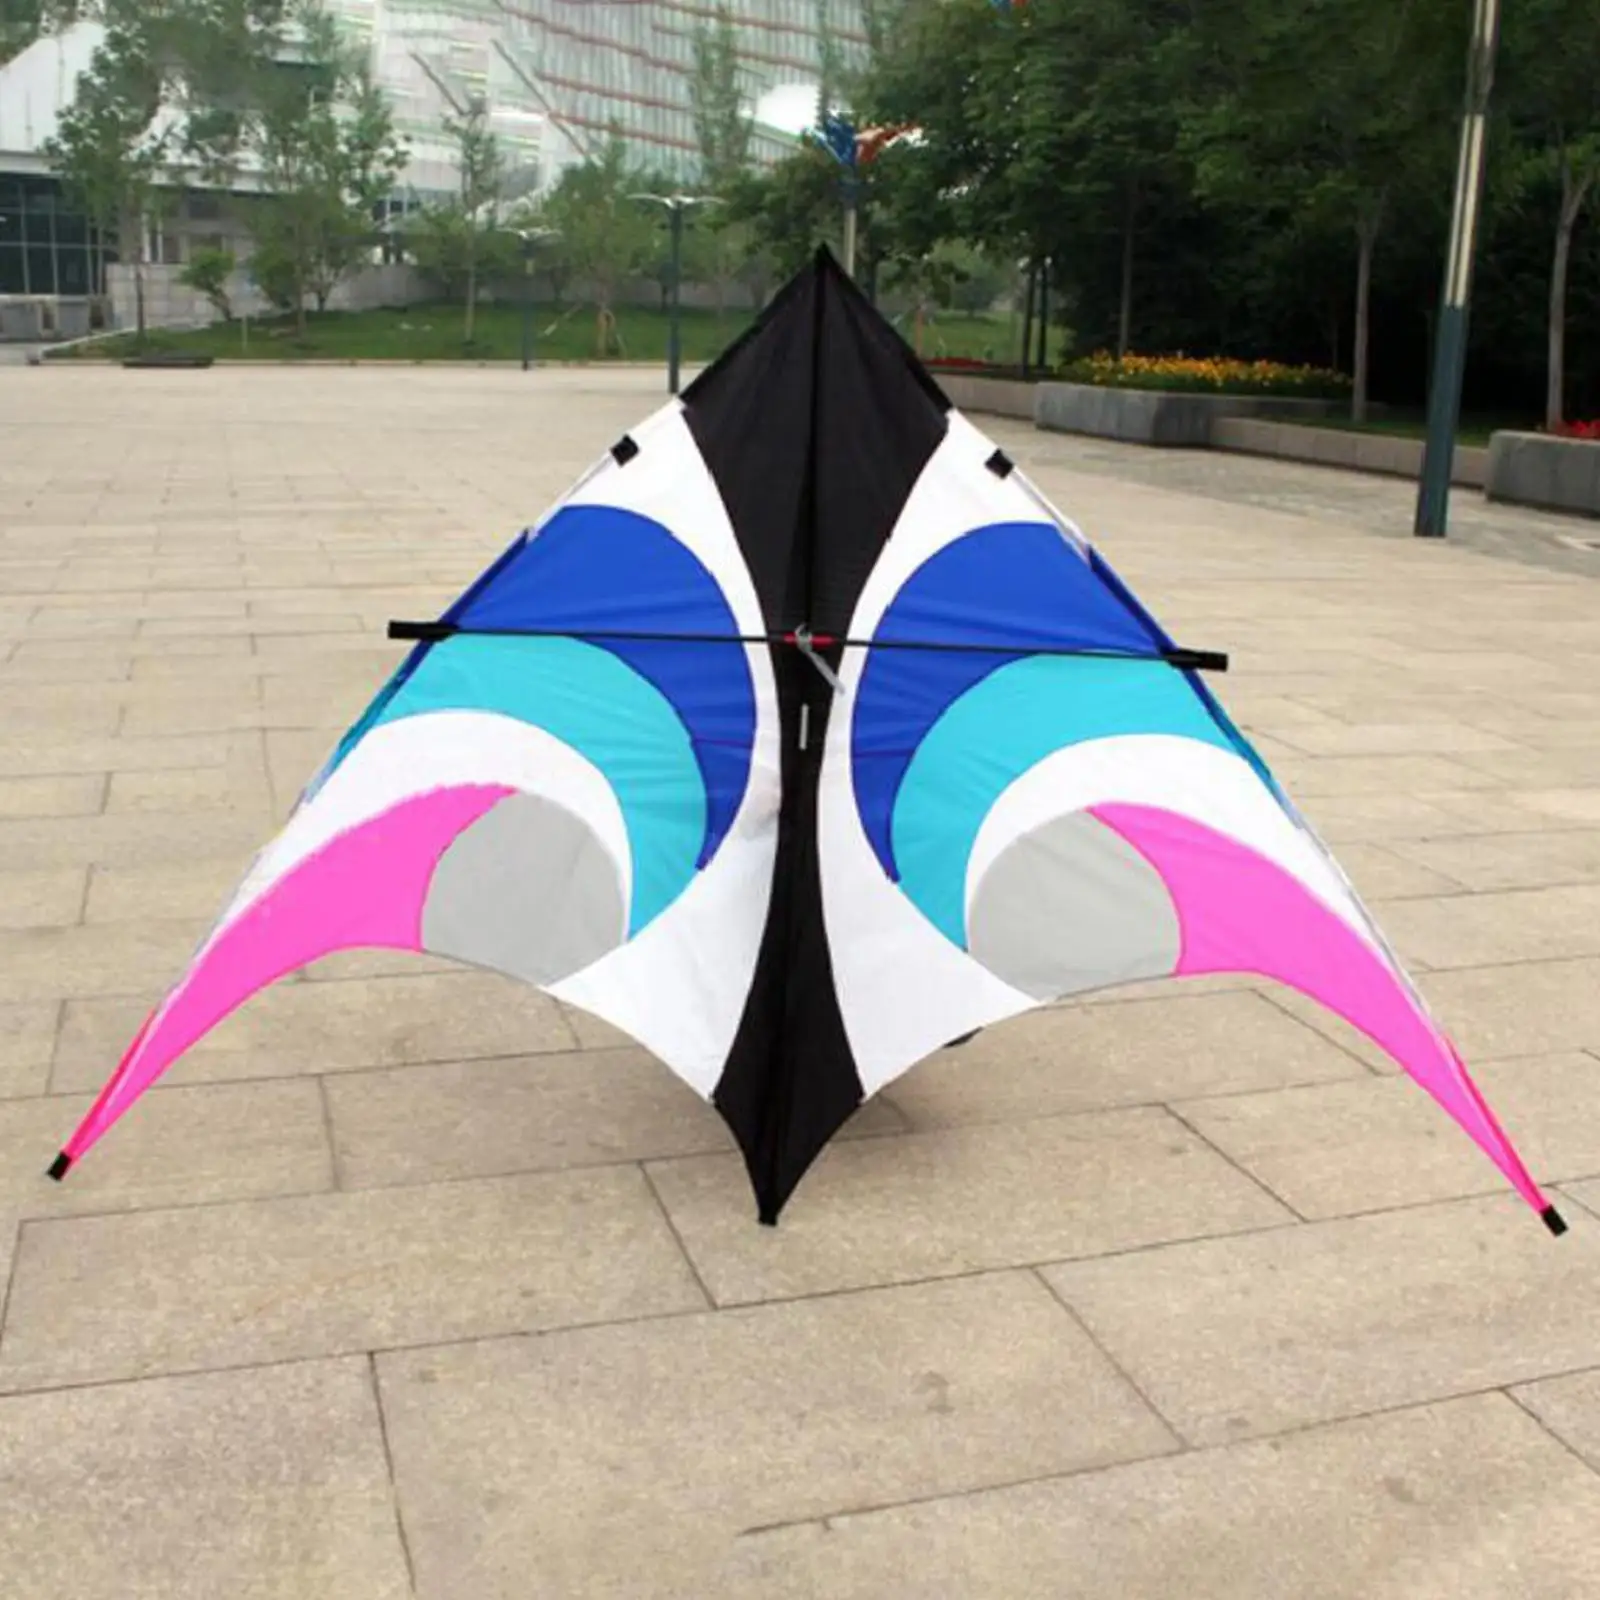 Single Line Kite Professional Easy to Fly Large for Sport Beginner Outdoor